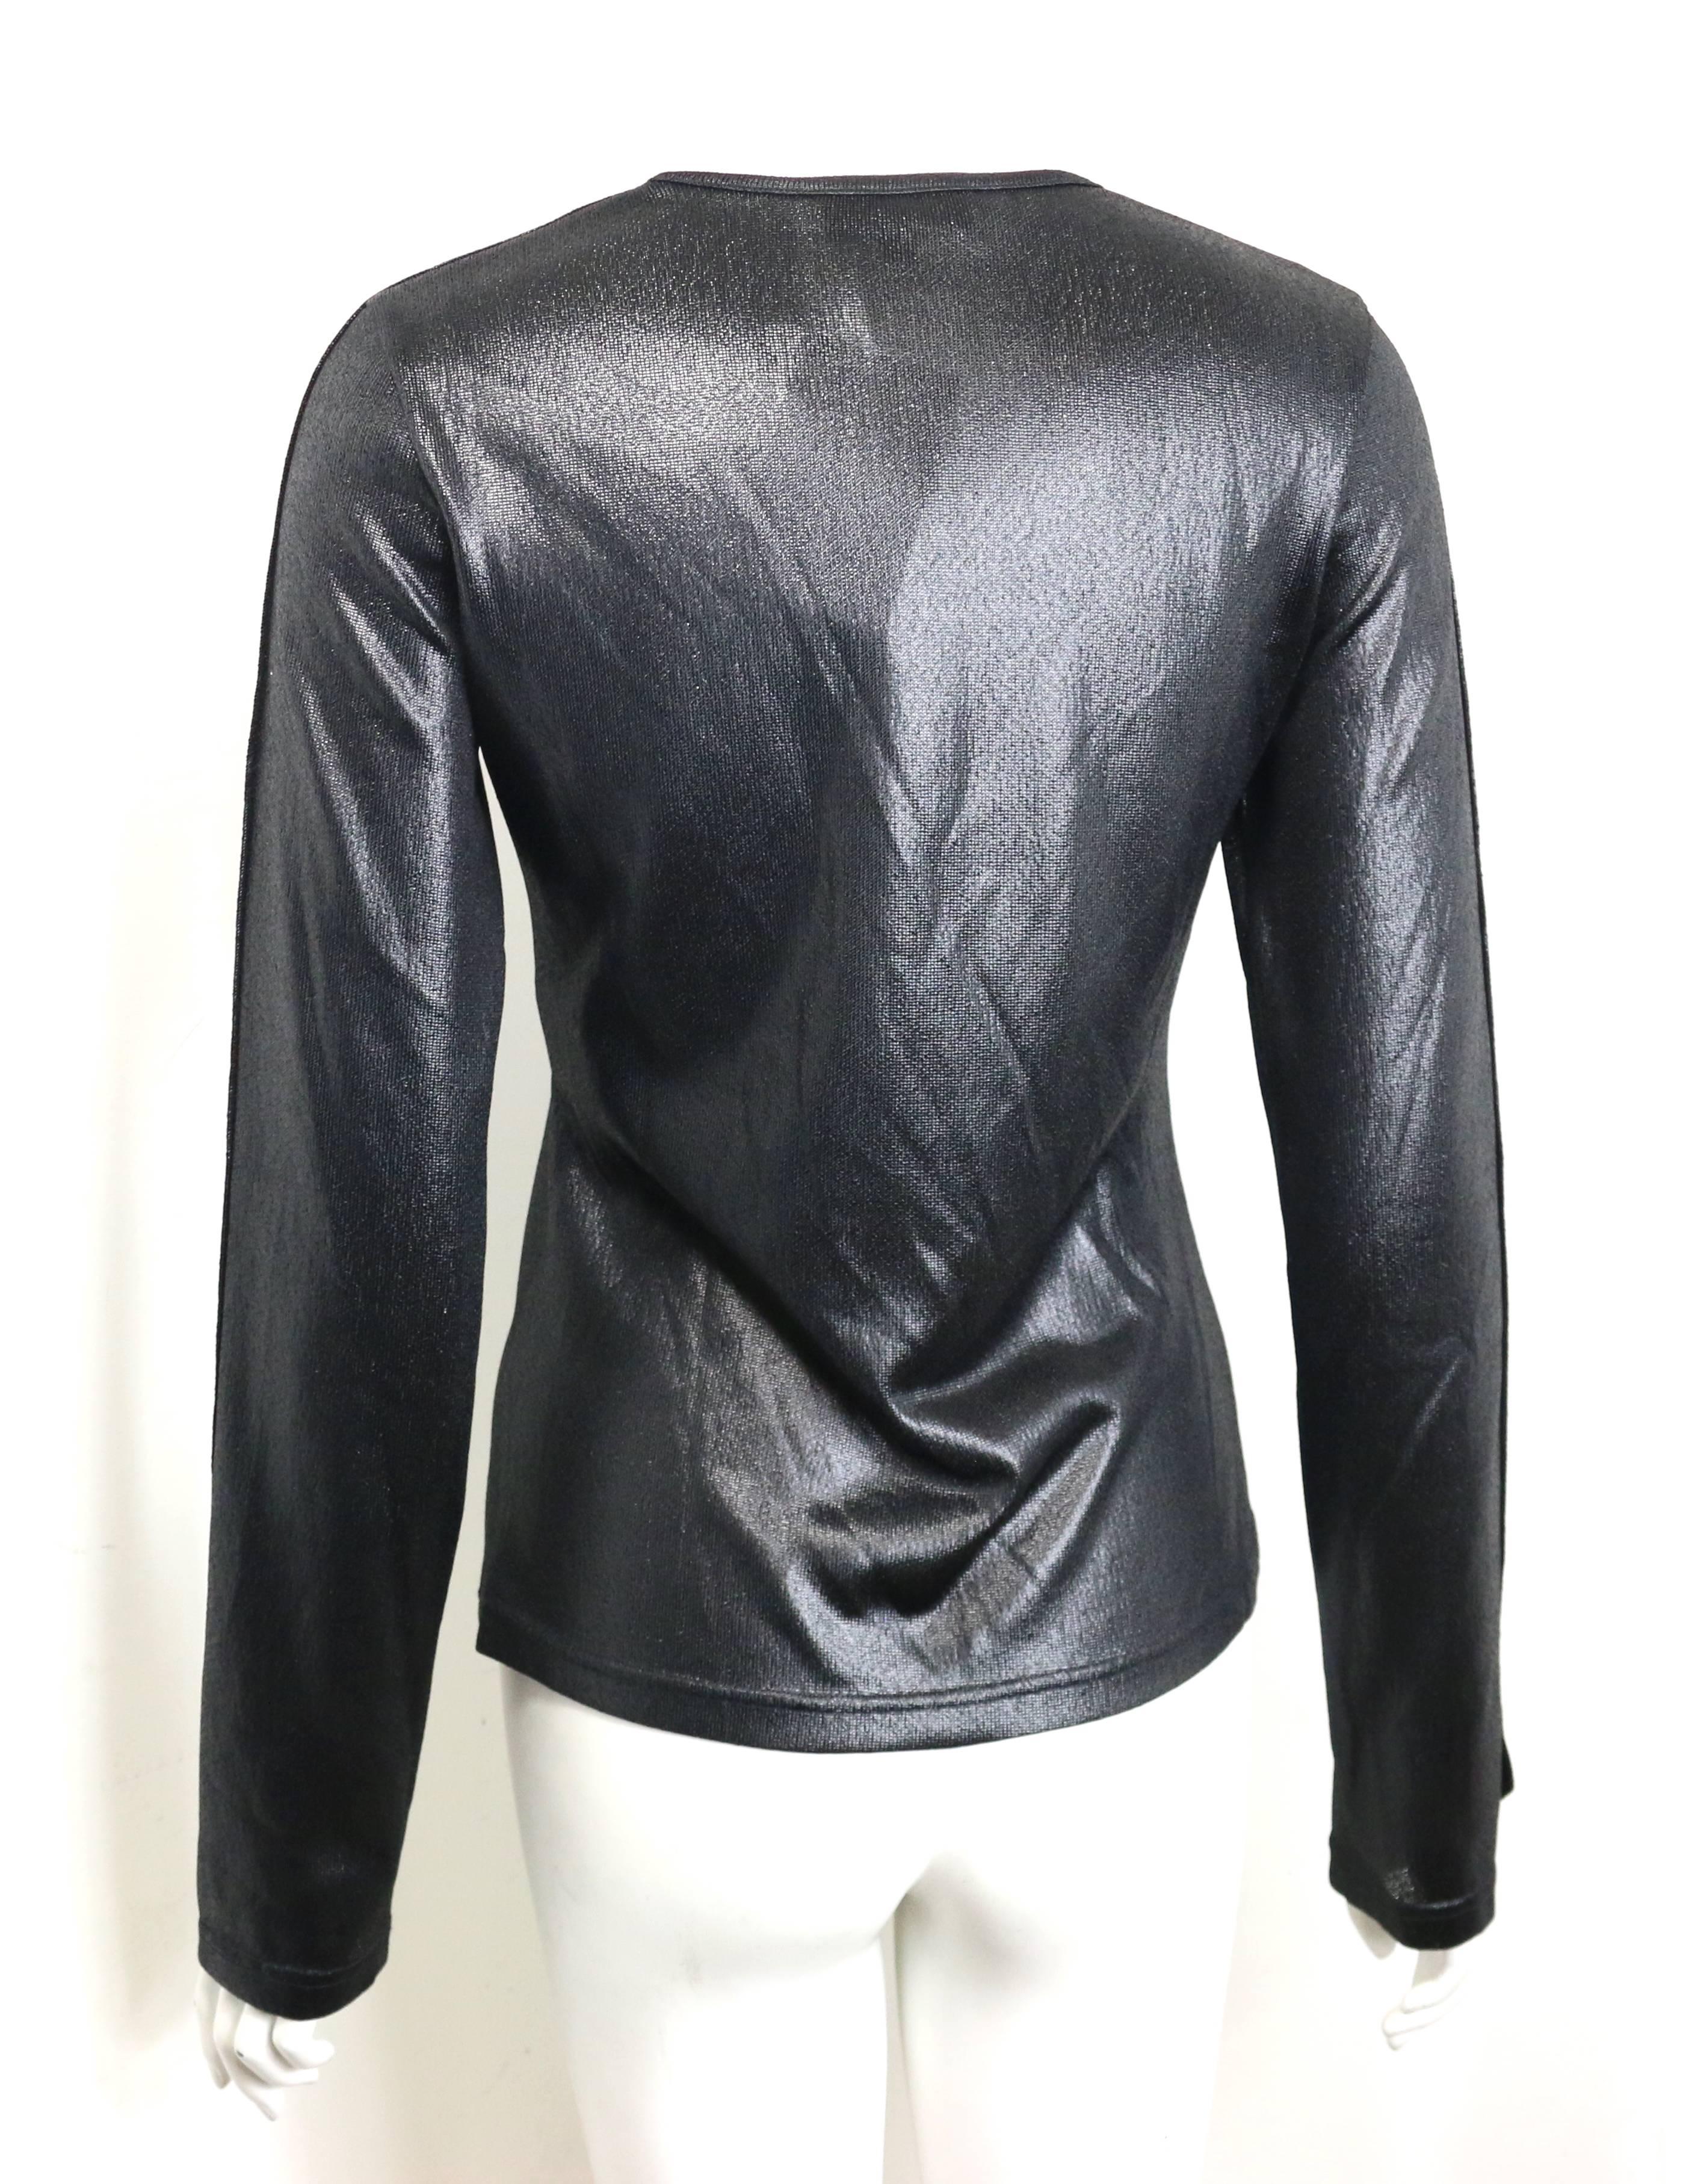 Gucci Black Polyester Long Sleeves Top In Excellent Condition For Sale In Sheung Wan, HK